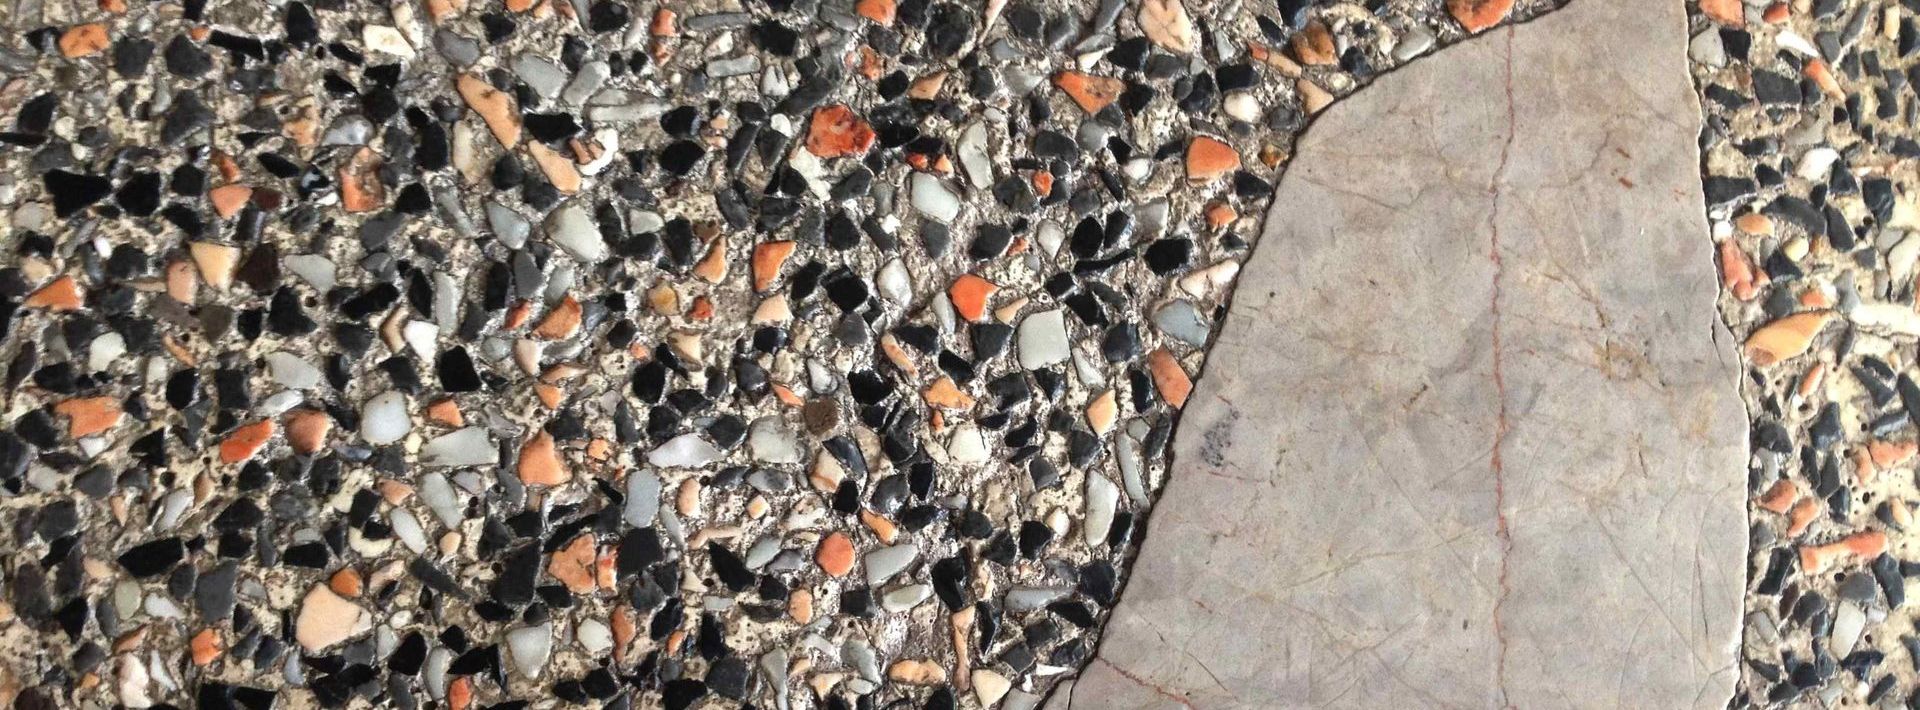 Exposed Concrete Aggregate With Large Stone